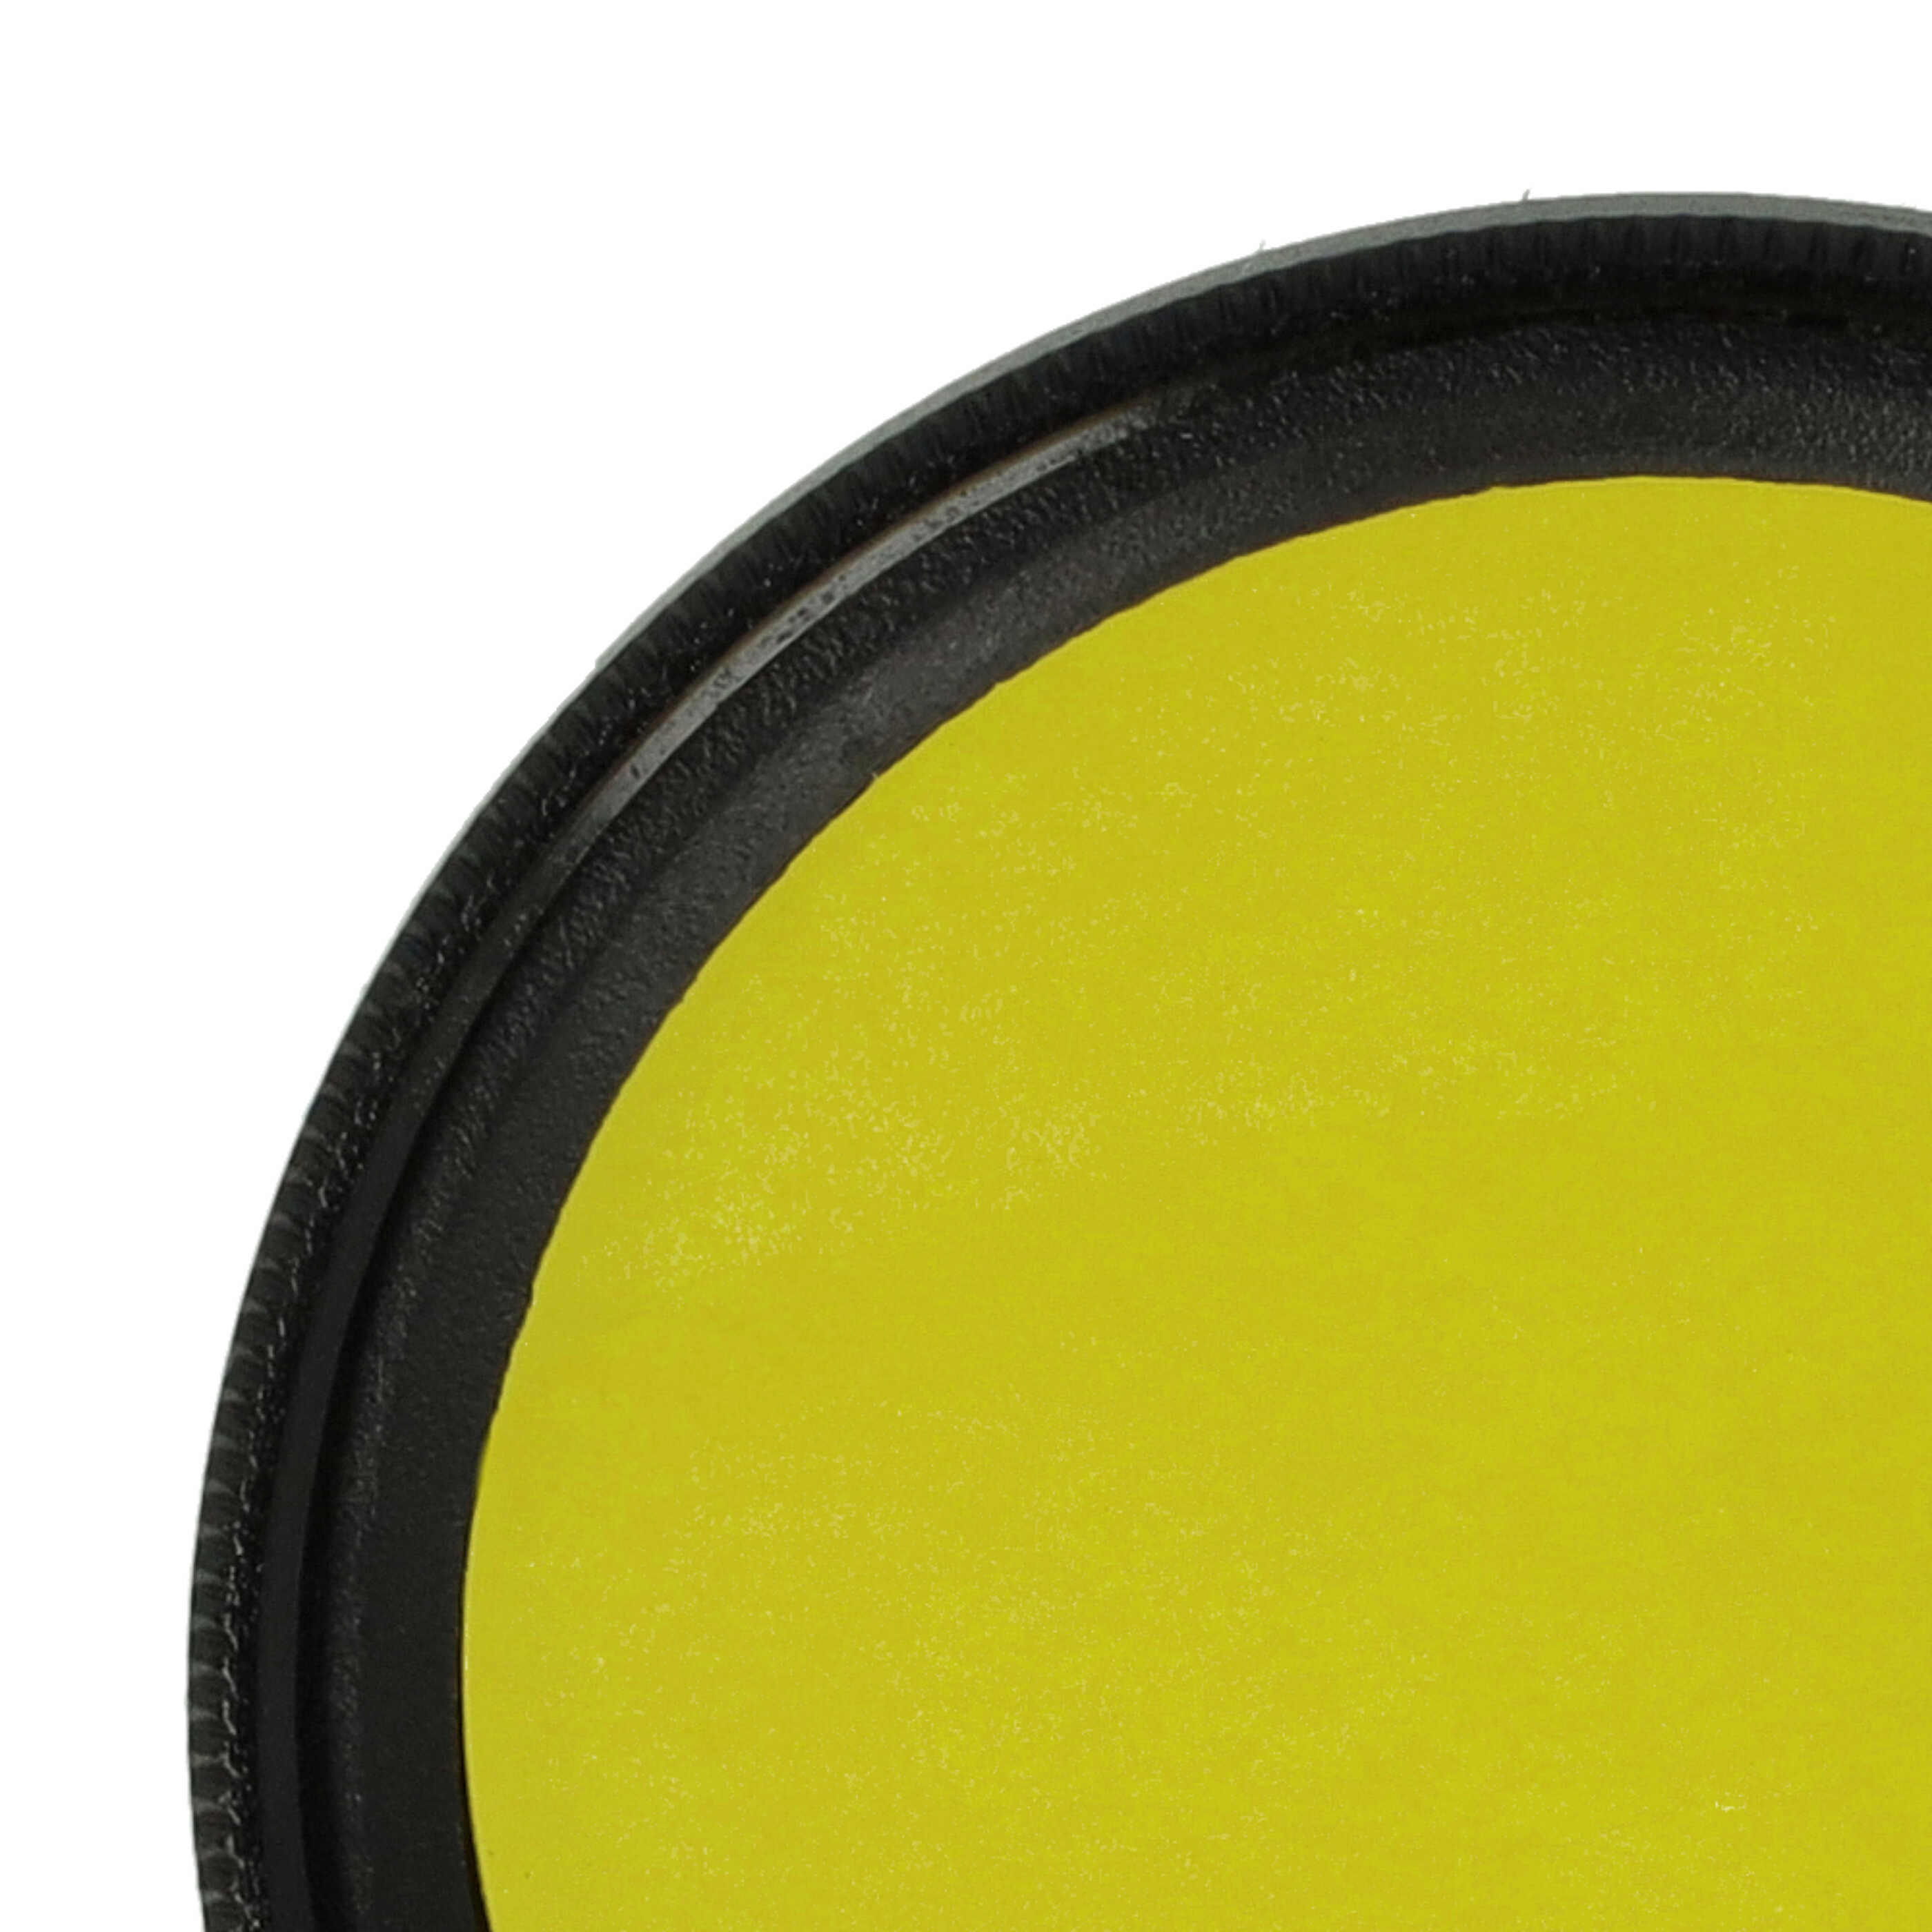 Coloured Filter, Yellow suitable for Camera Lenses with 37 mm Filter Thread - Yellow Filter